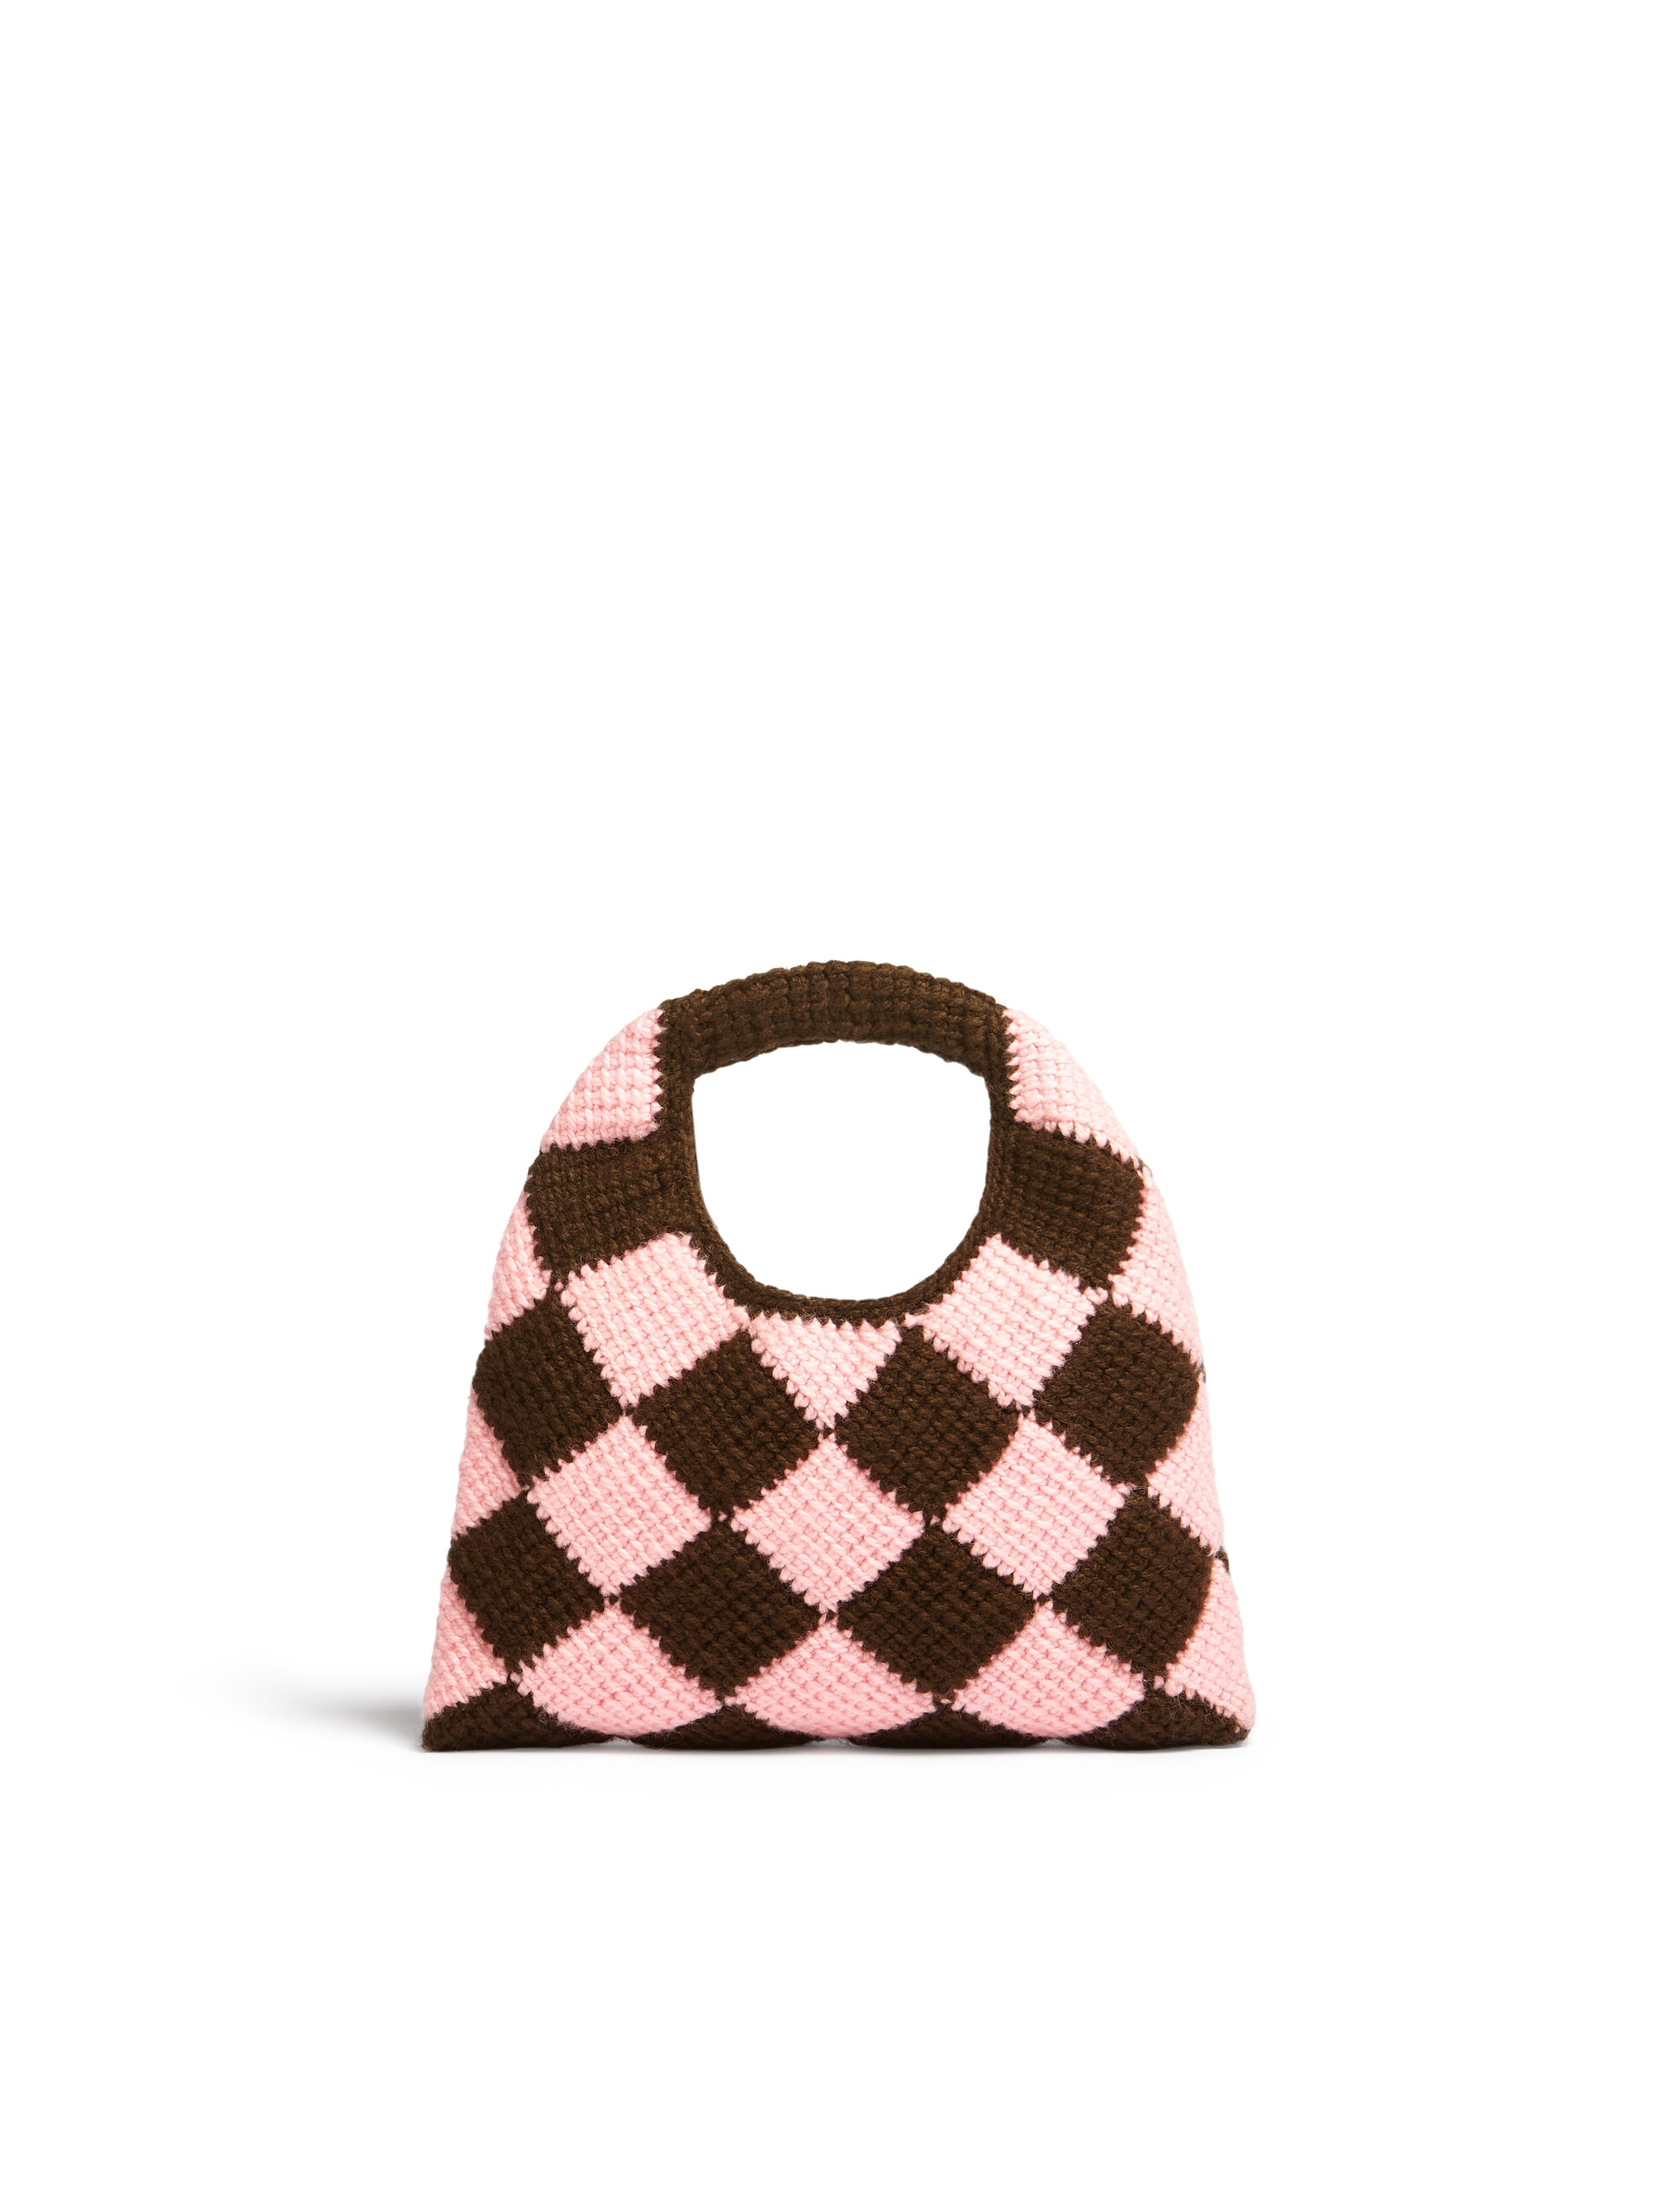 MARNI MARKET DIAMOND small bag in brown and pink tech wool - Shopping Bags - Image 3